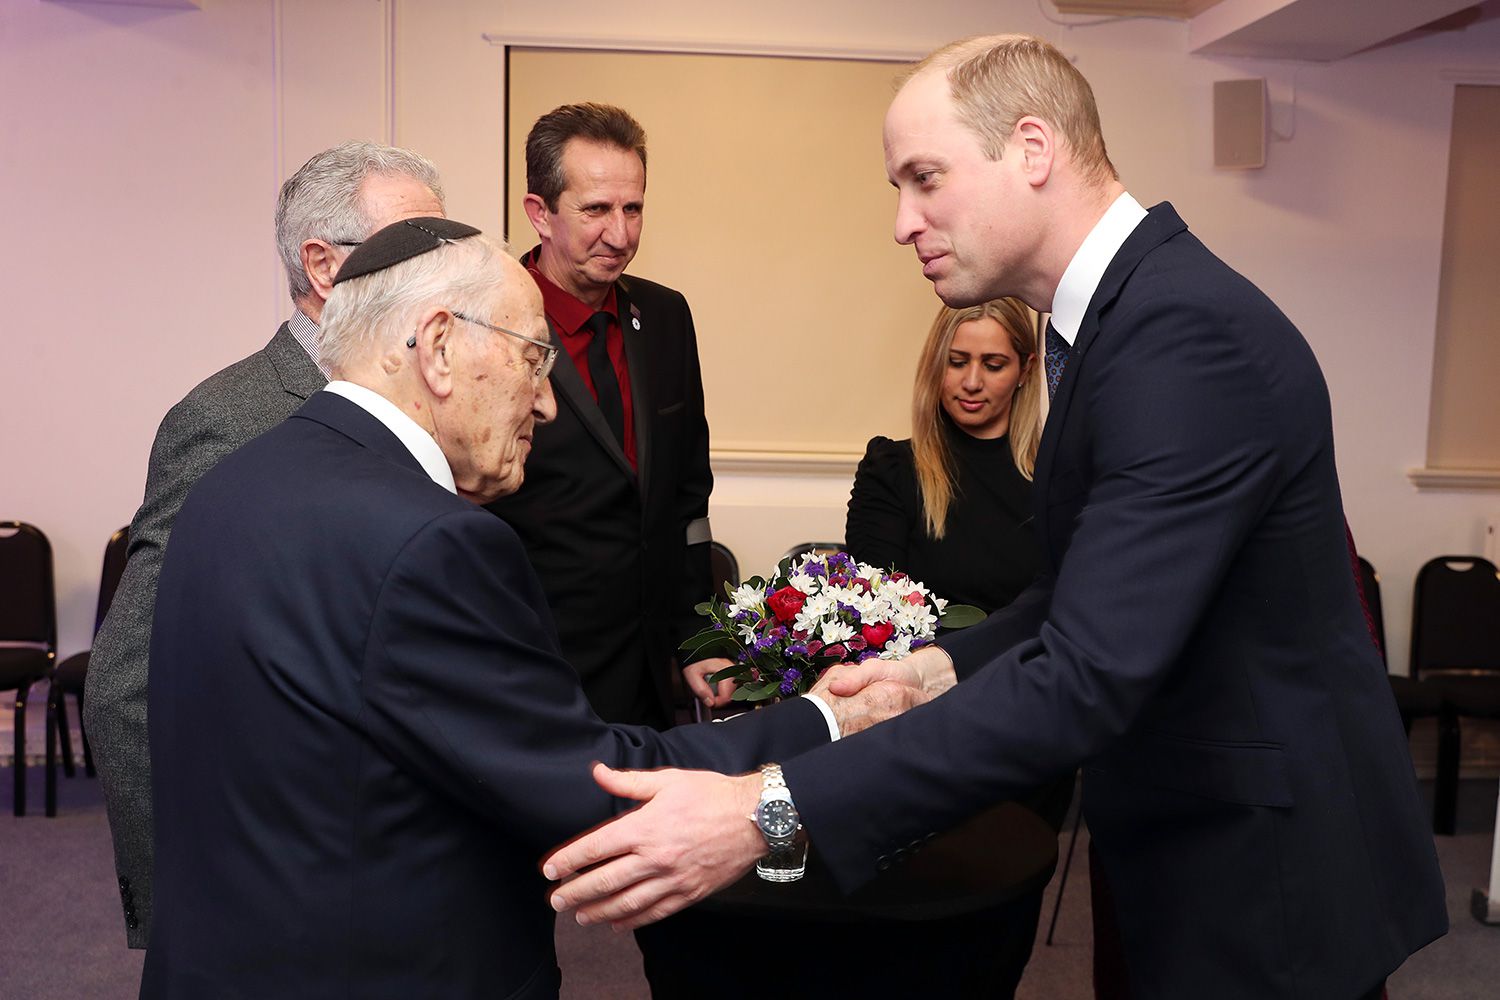 Prince William, Duke of Cambridge shakes hands with Manfred Goldberg at the UK Holocaust Memorial Day Commemorative Ceremony in Westminster on January 27, 2020 in London